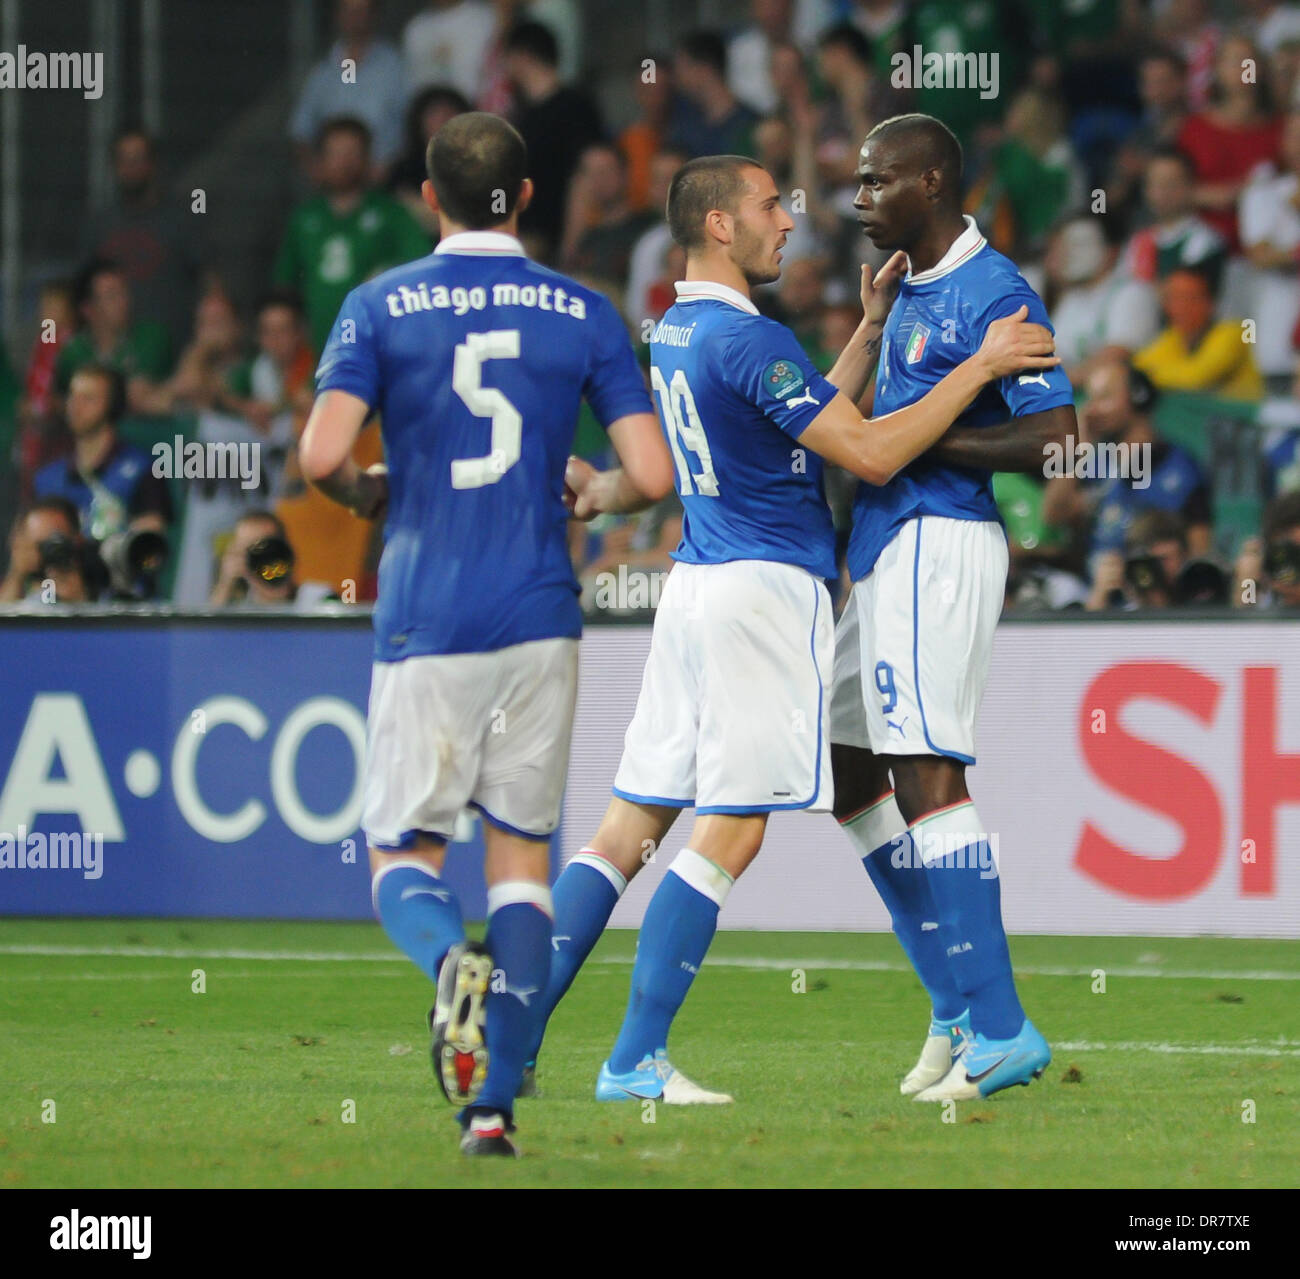 Mario Balotelli (Manchester City FC) scores for Italy  during the European Championship Group C game between Italy and Ireland at the Municipal Stadium. In Poznan, Poland on June 18, 2012. Italy won the match 2-0 Poznan, Poland - 18.06.12 Stock Photo